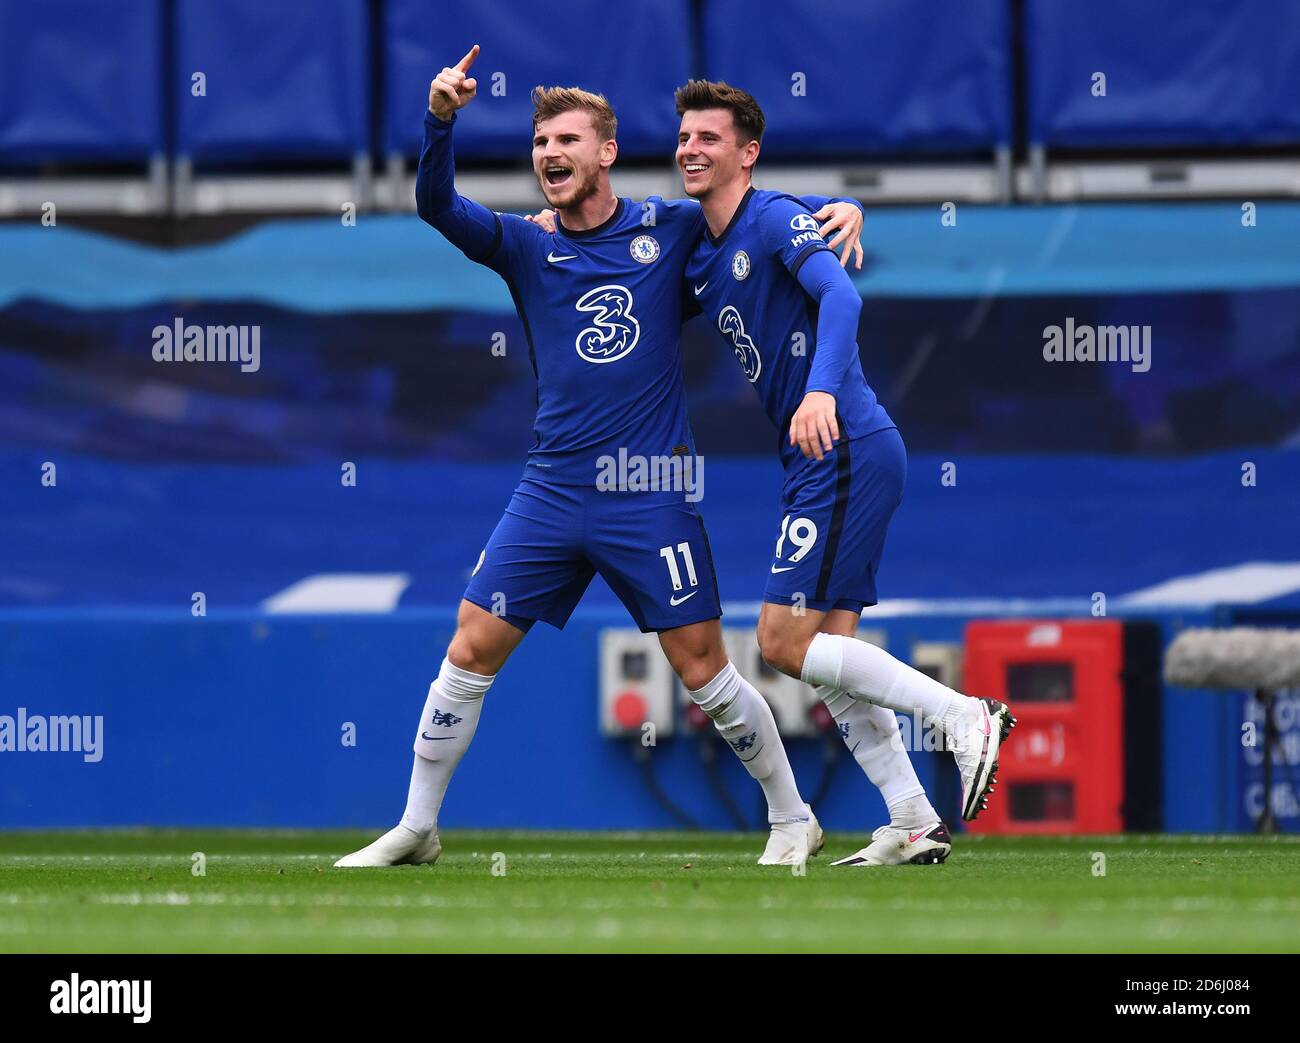 London, England, 17th Oct 2020  Timo Werner celebrates his goal with Mason Mount during the Premier League match at Stamford Bridge, London.  Chelsea v Southampton.  Premier League. Credit : Mark Pain / Alamy Live News Stock Photo